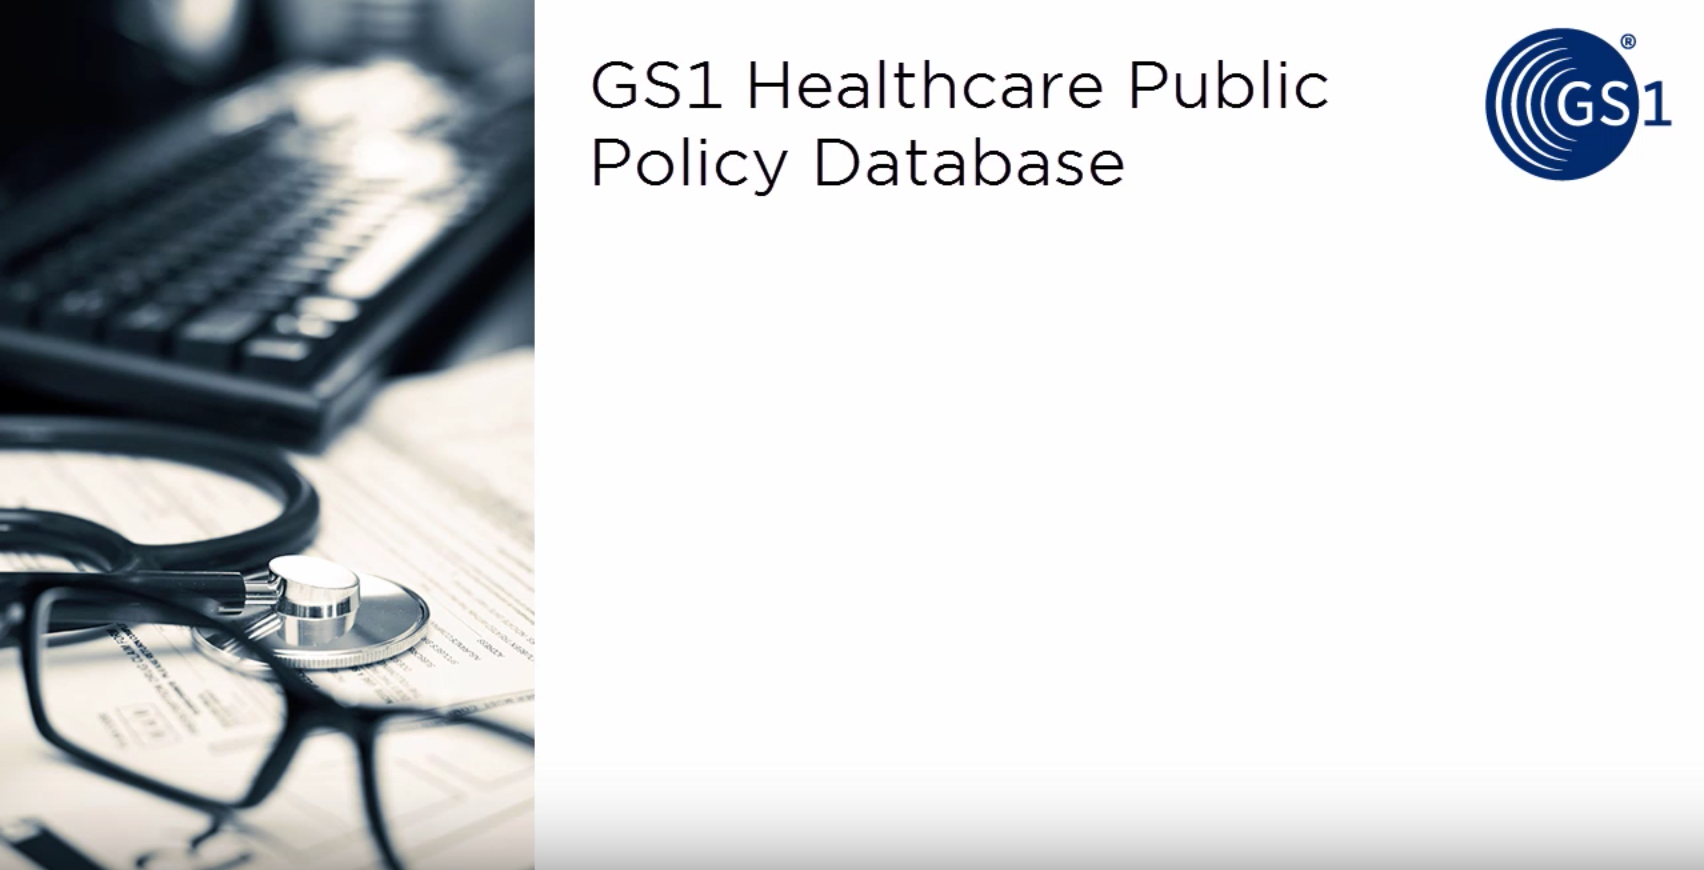 How to use the Healthcare Public Policy Database?